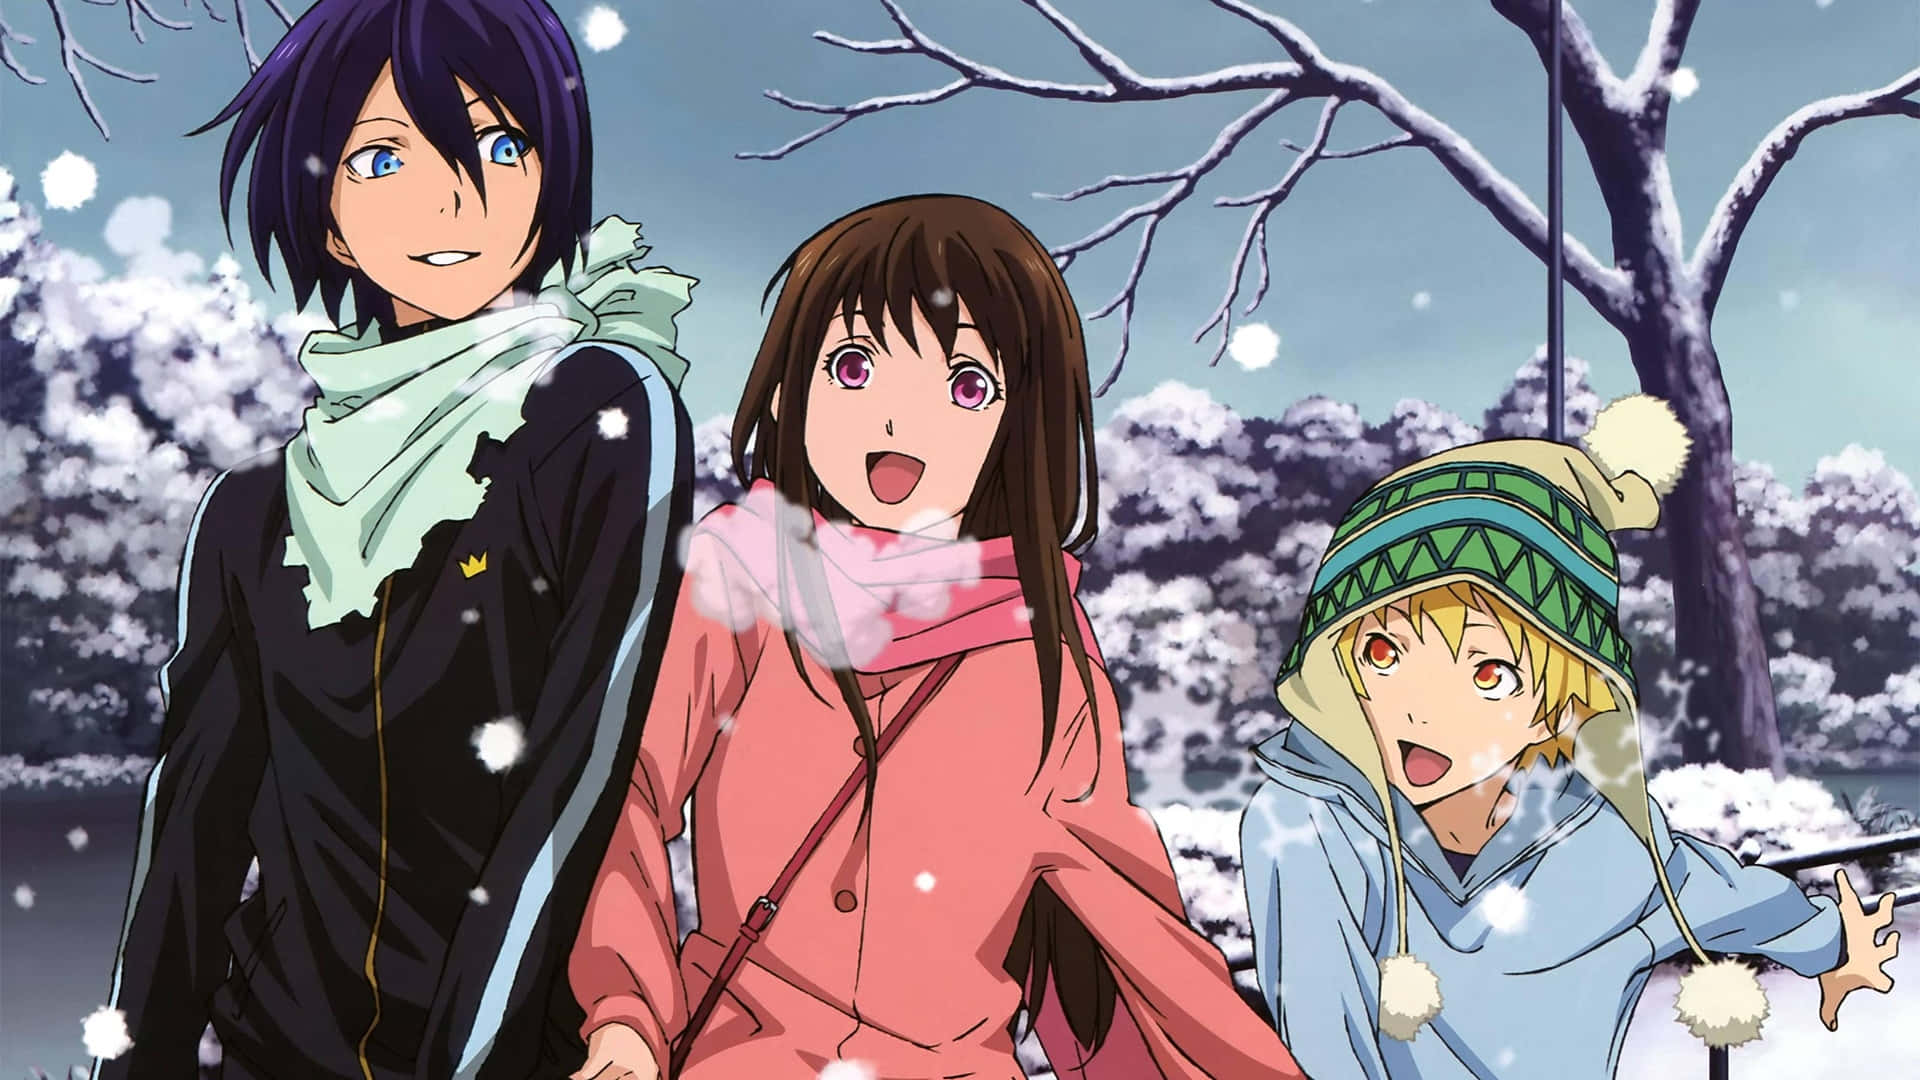 Find your path with Yato in Noragami